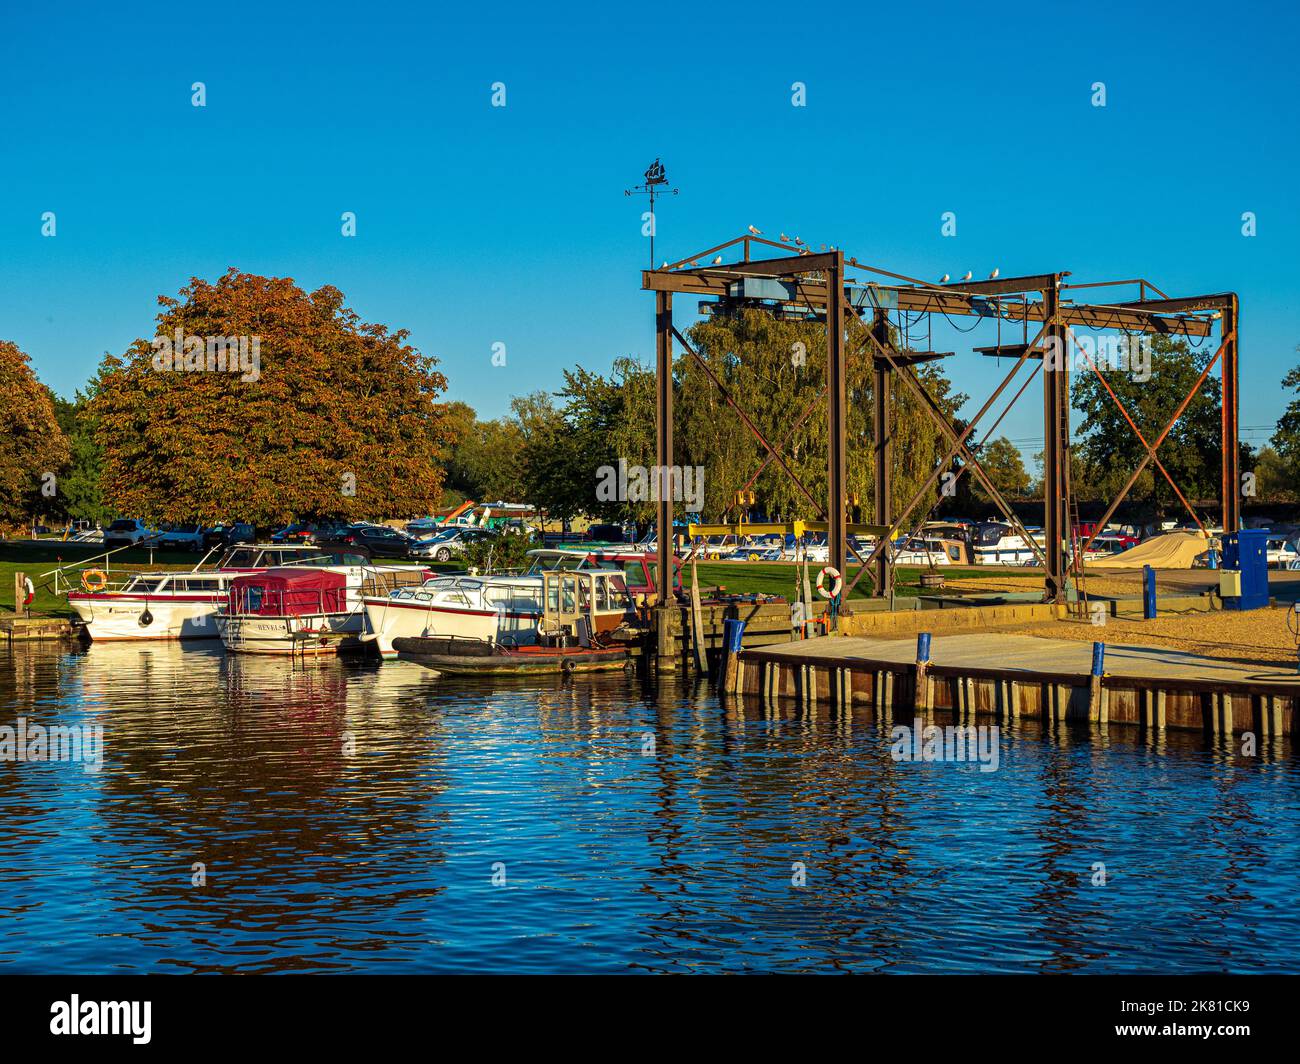 Cathedral Marina in Ely am Fluss Great Ouse, mit Bootslift. Ely Marina. River Ouse Marina Ely. Stockfoto